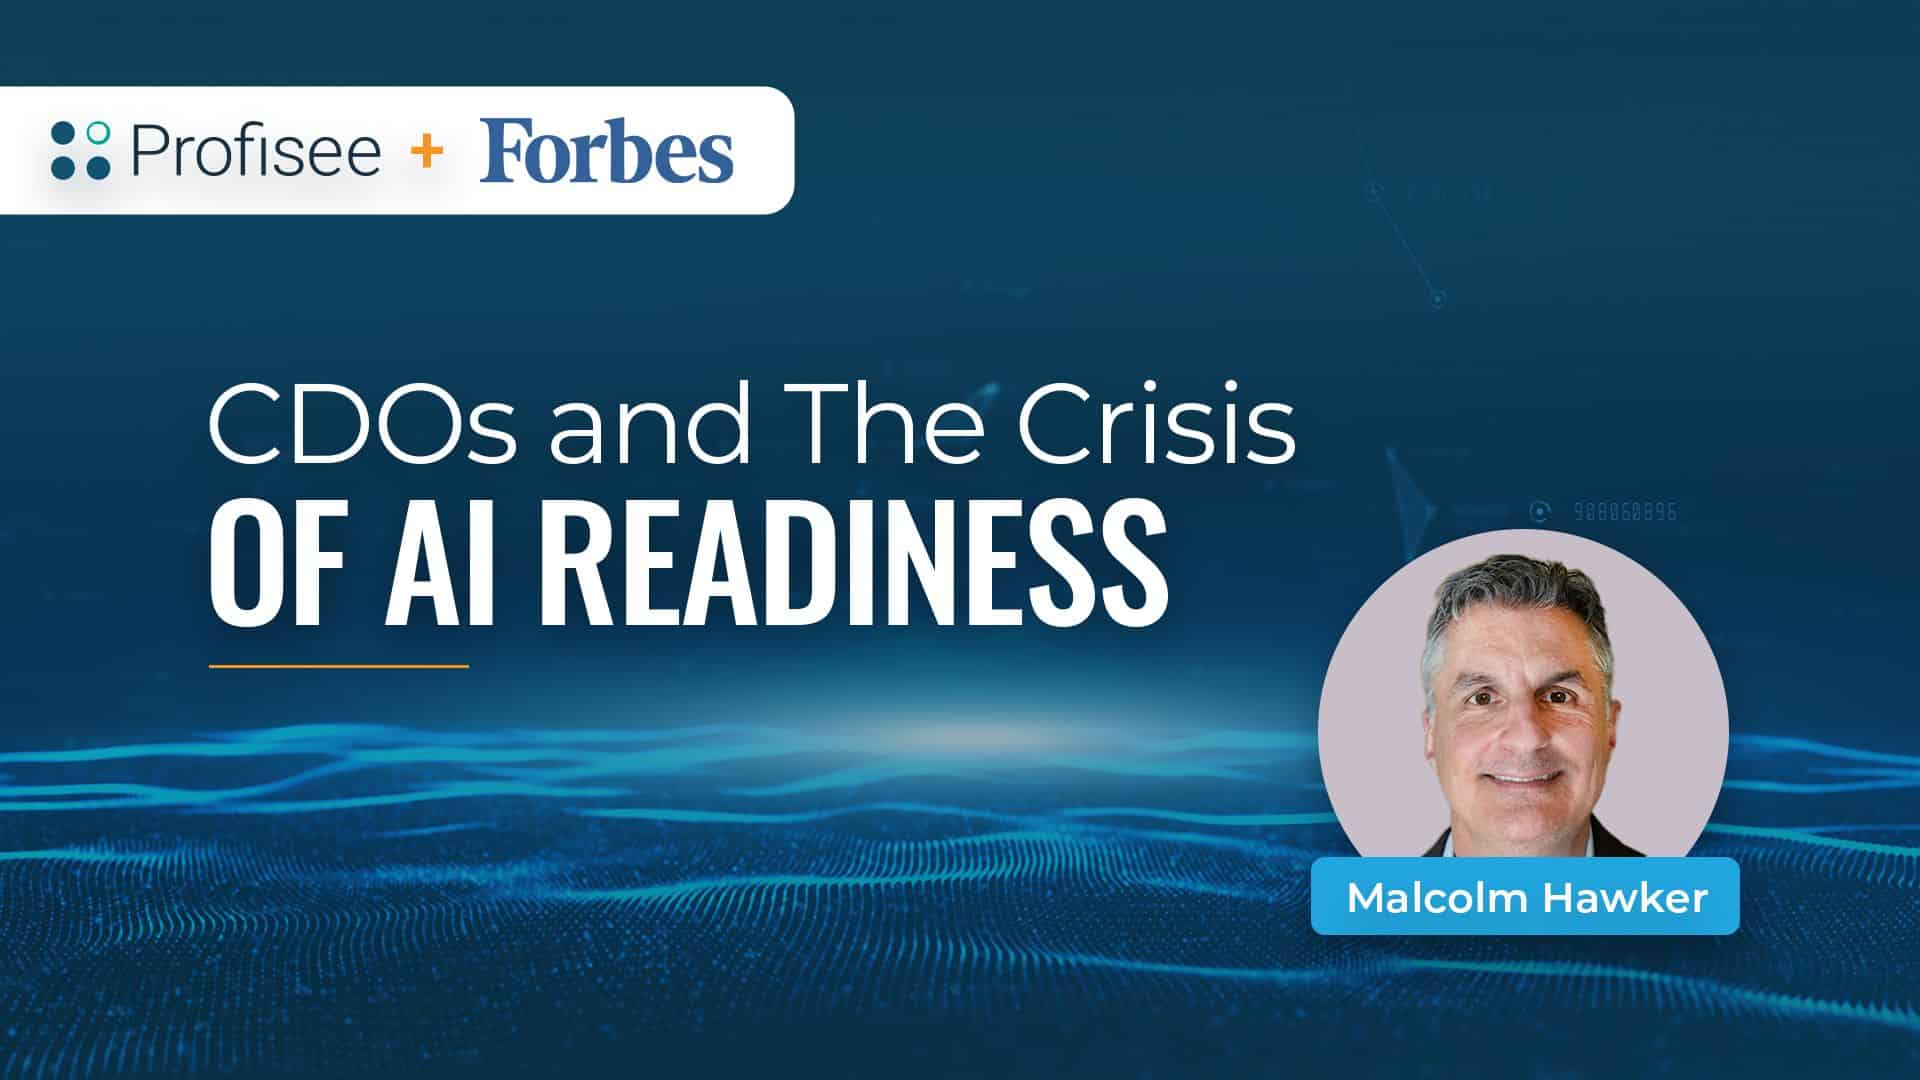 CDOs And The Crisis of AI Readiness